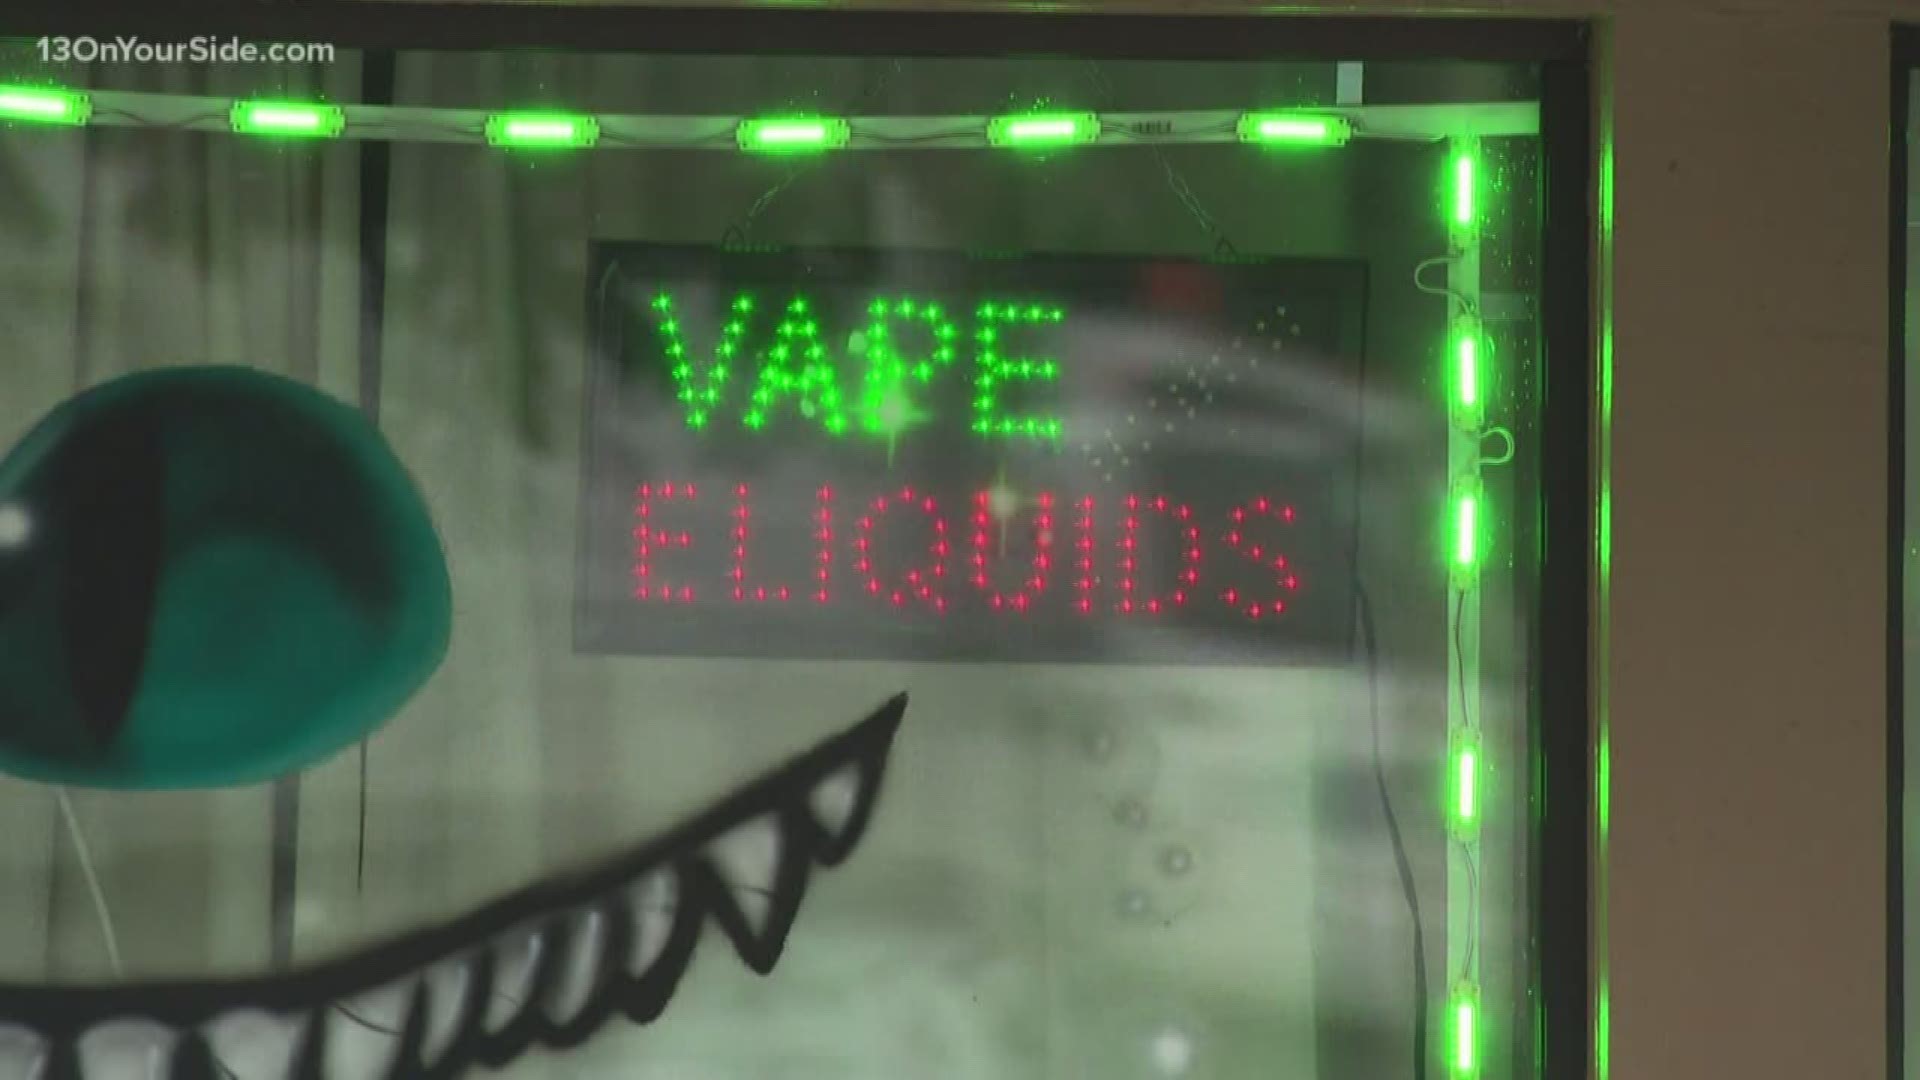 A Michigan judge temporarily blocked the state's weeks-old ban on flavored e-cigarettes Tuesday